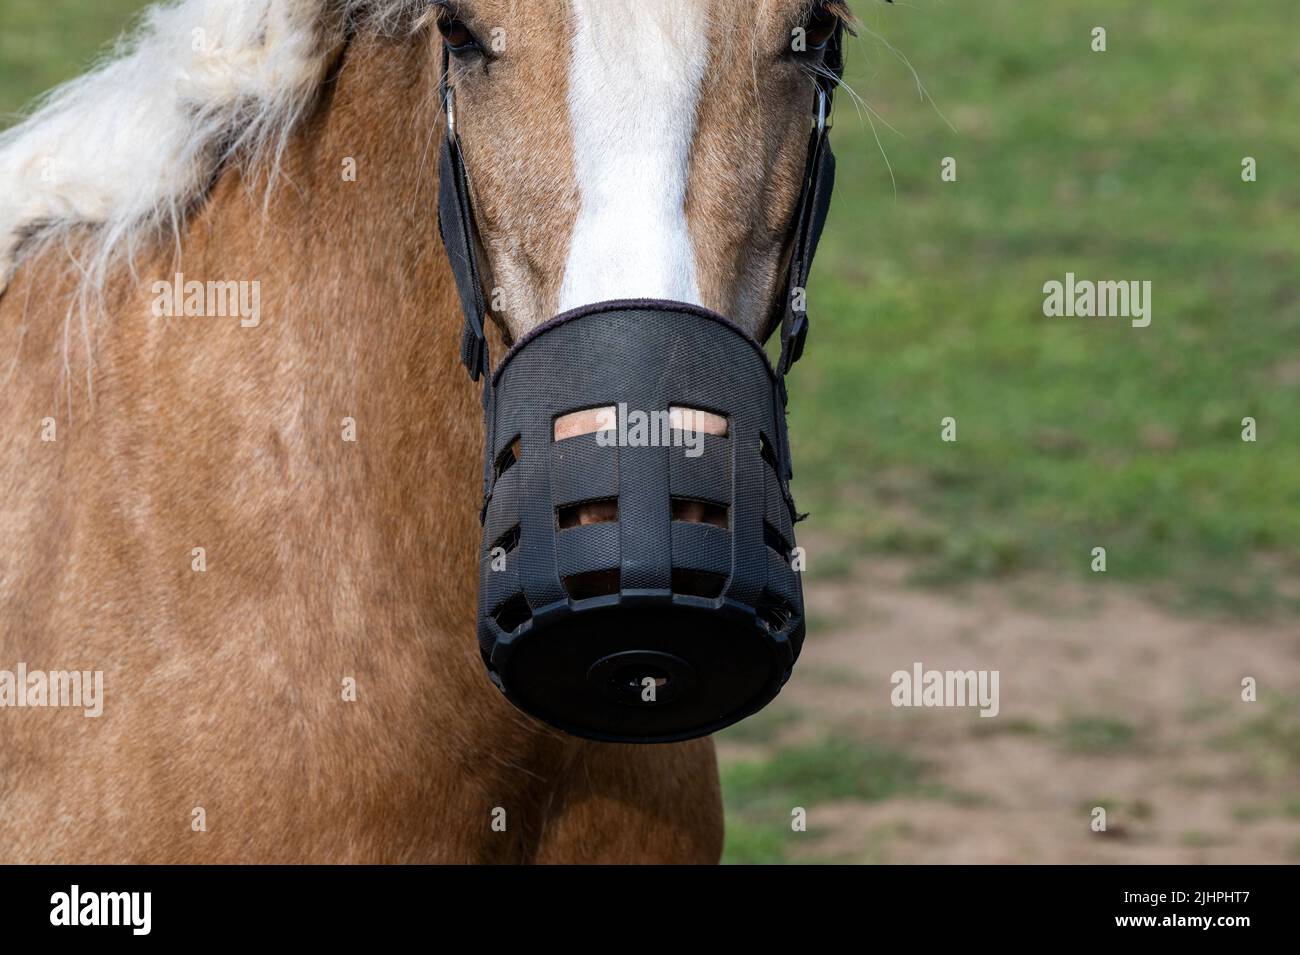 Horse wearing eating restrictor Stock Photo